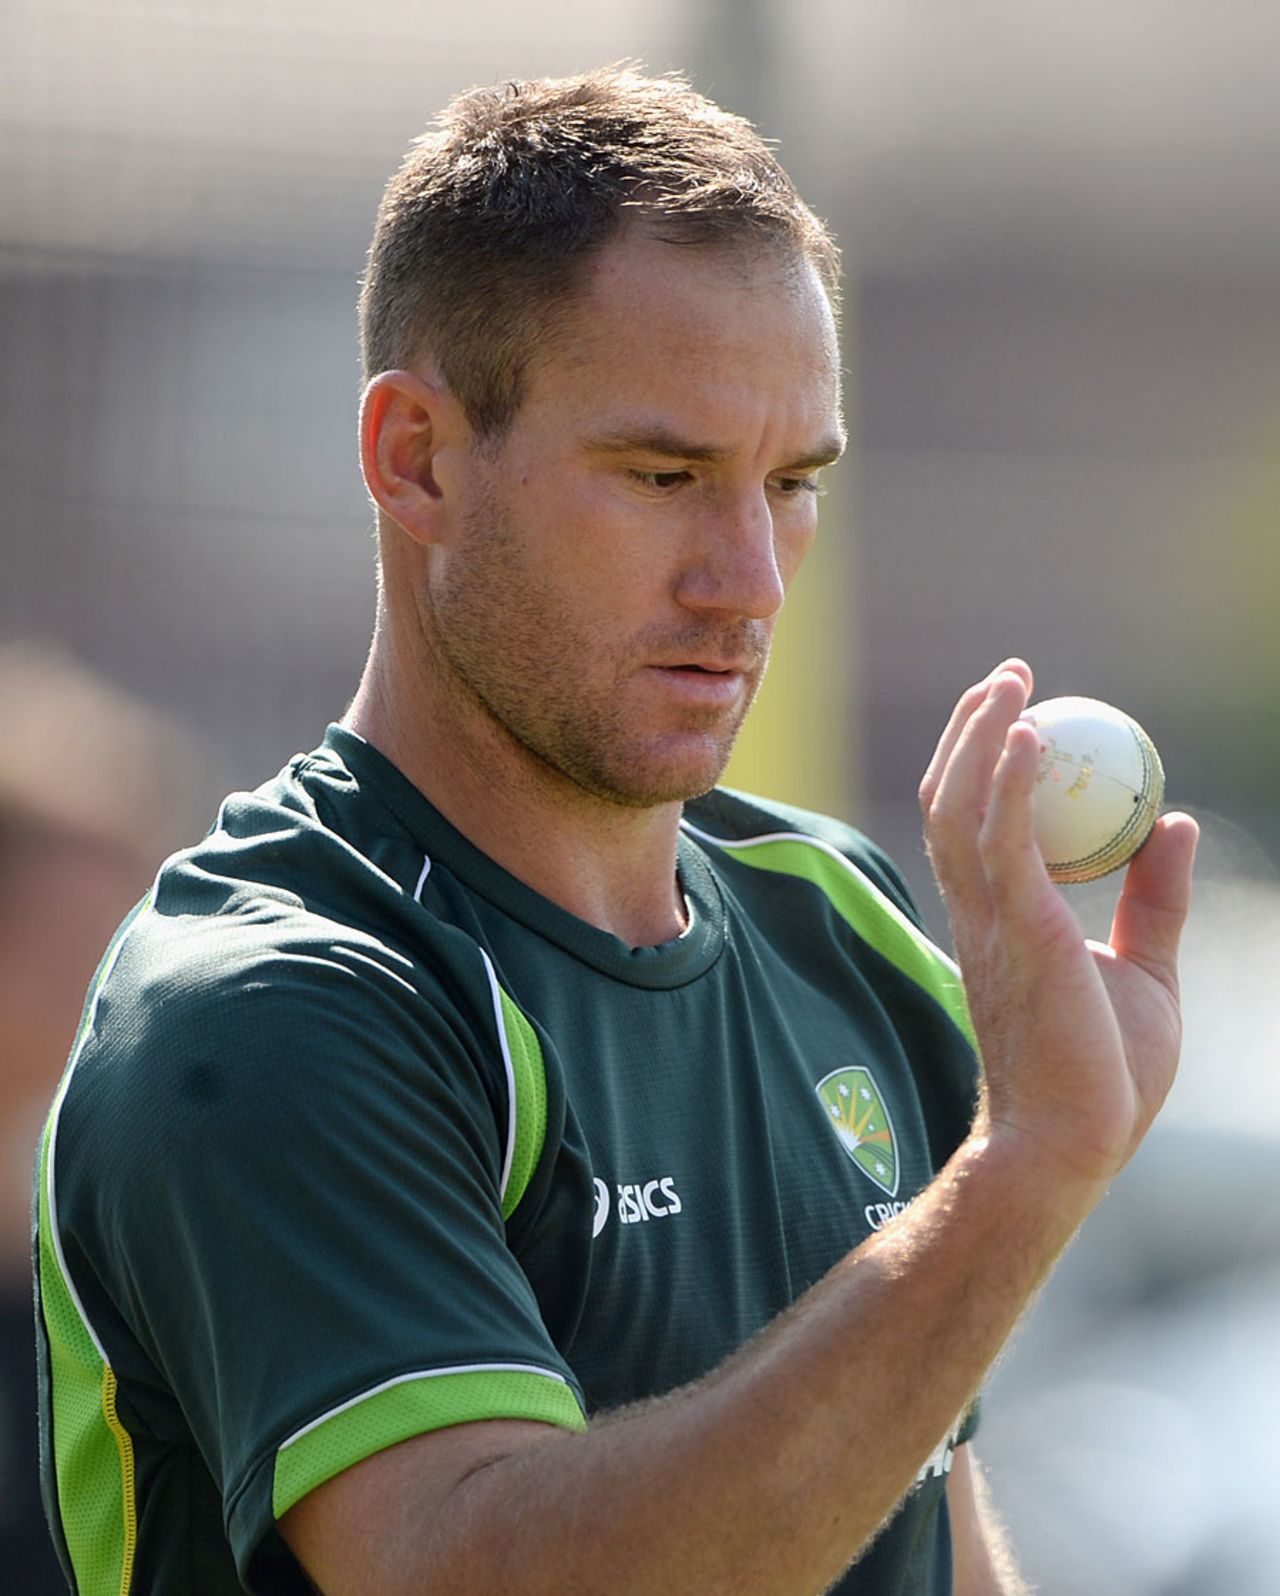 John Hastings has an unexpected chance to resume his Australia career, OId Trafford, September 7, 2015